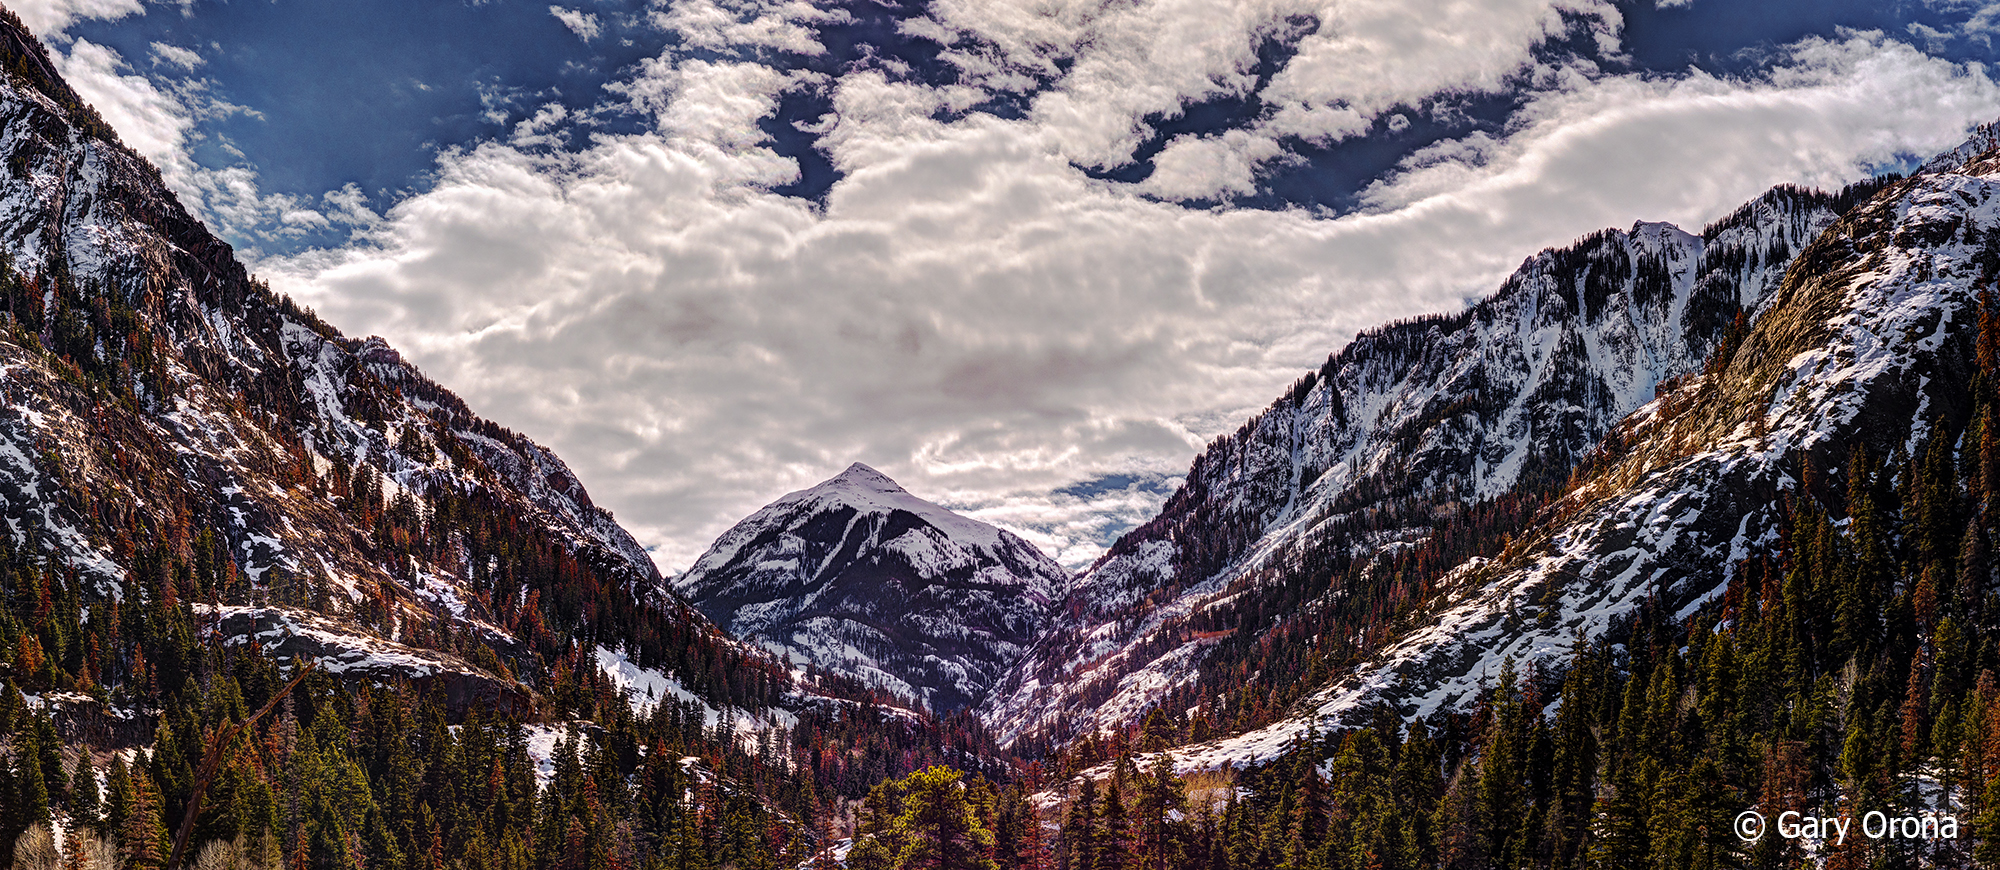 A breathtaking landscape image of a snow covered mountain valley, pine forest and fluffy clouds